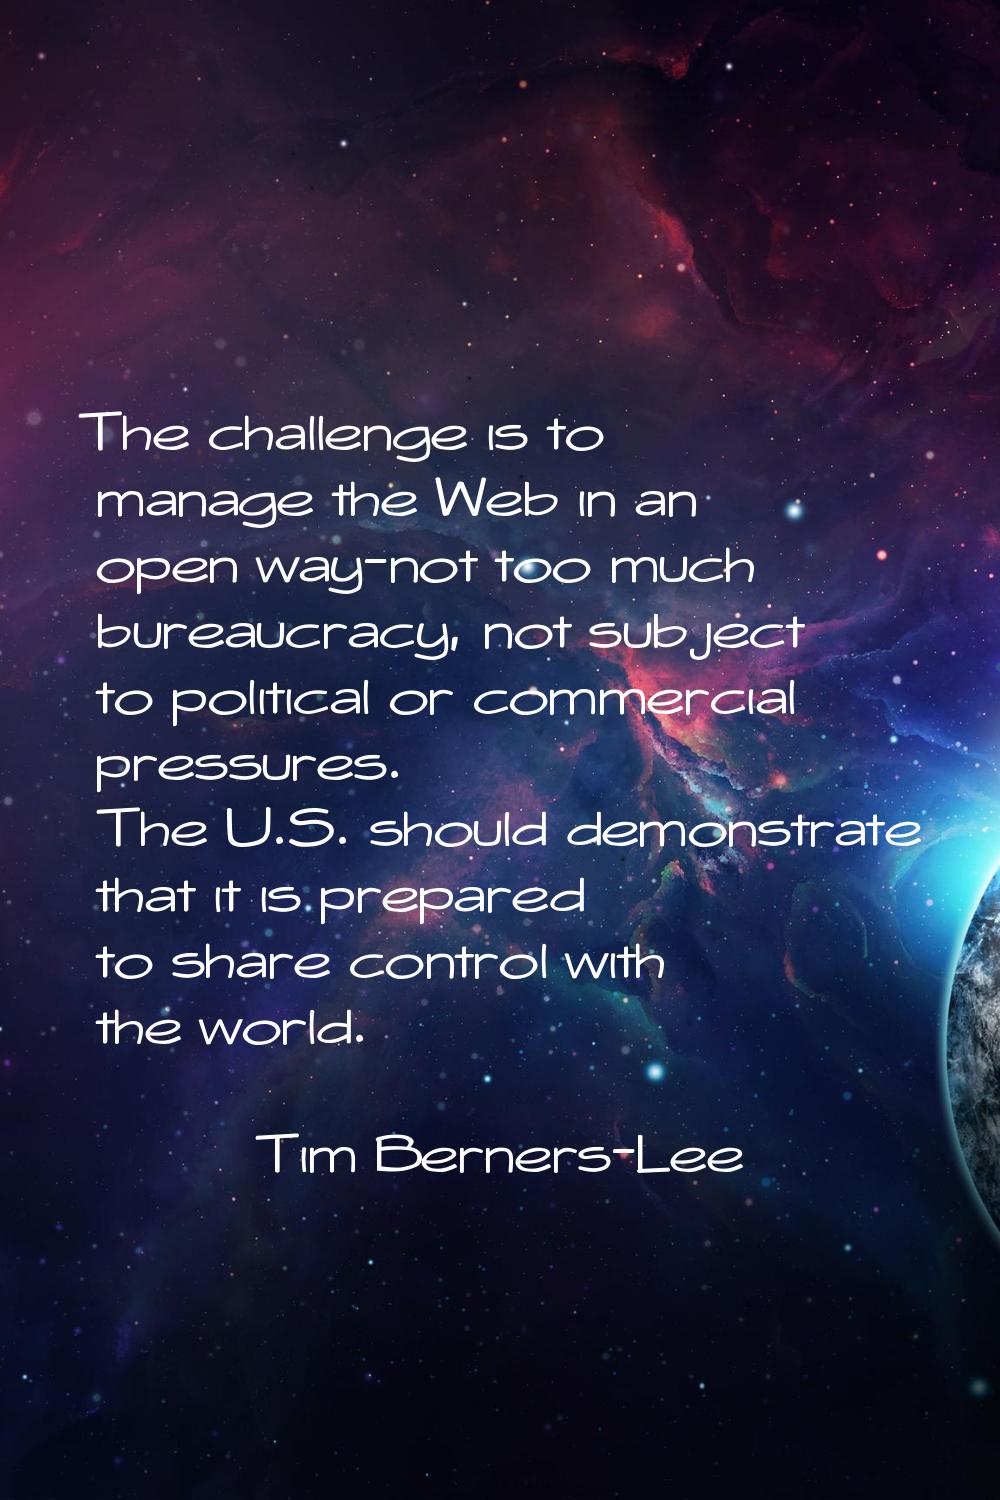 The challenge is to manage the Web in an open way-not too much bureaucracy, not subject to politica